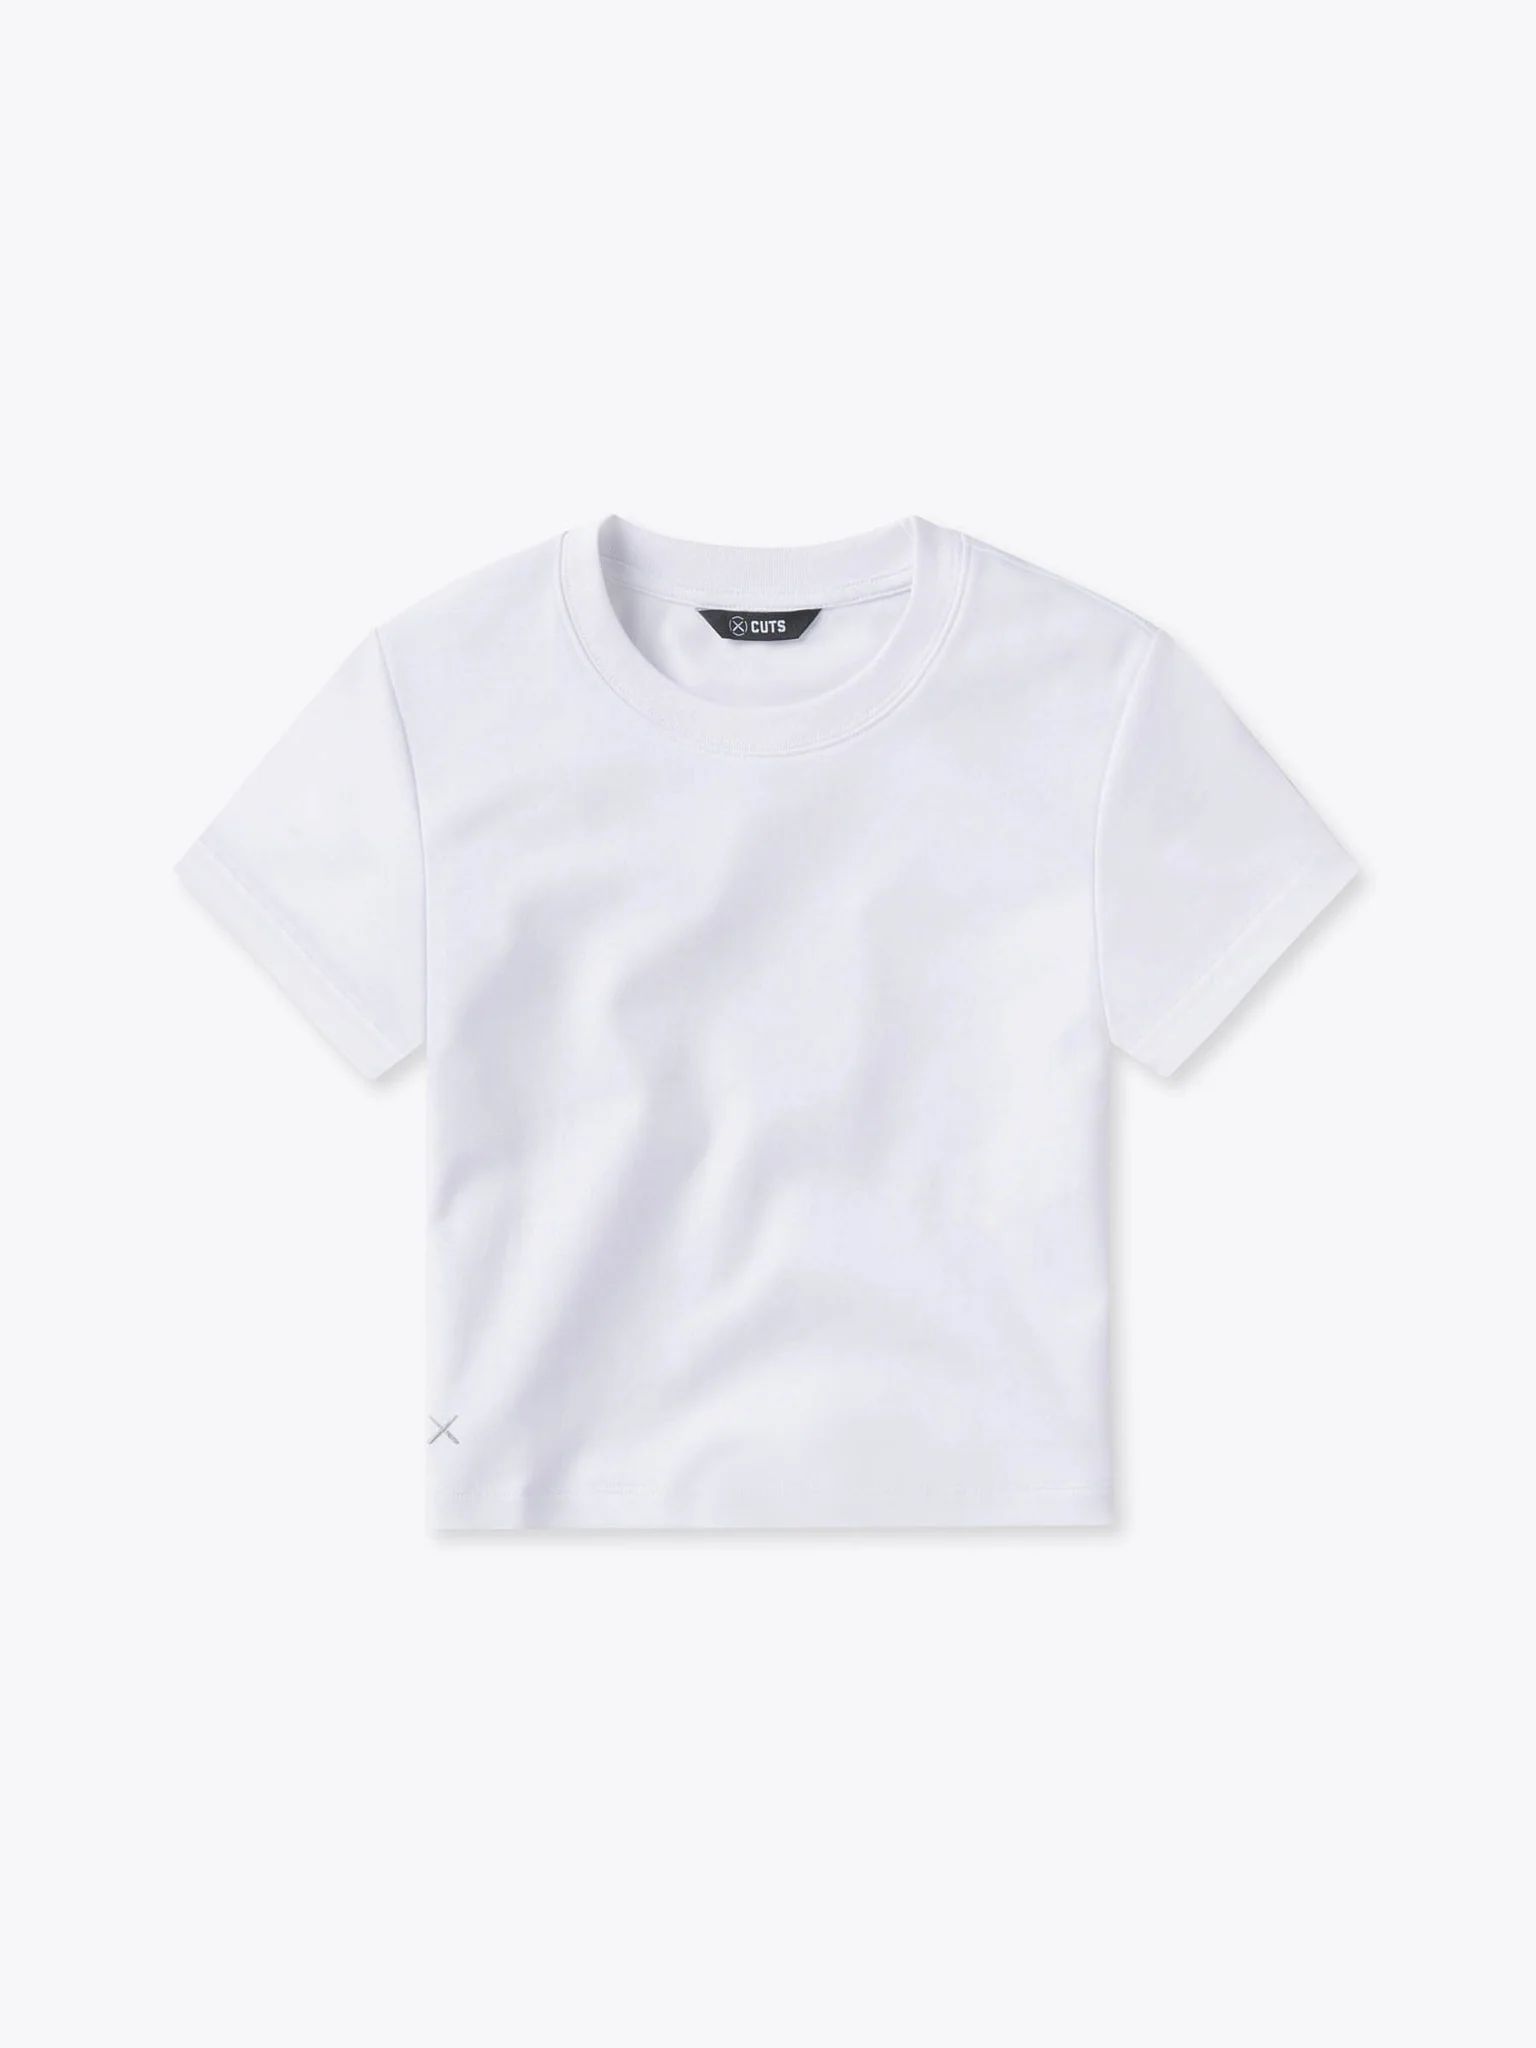 Tomboy Tee Cropped | Cuts Clothing